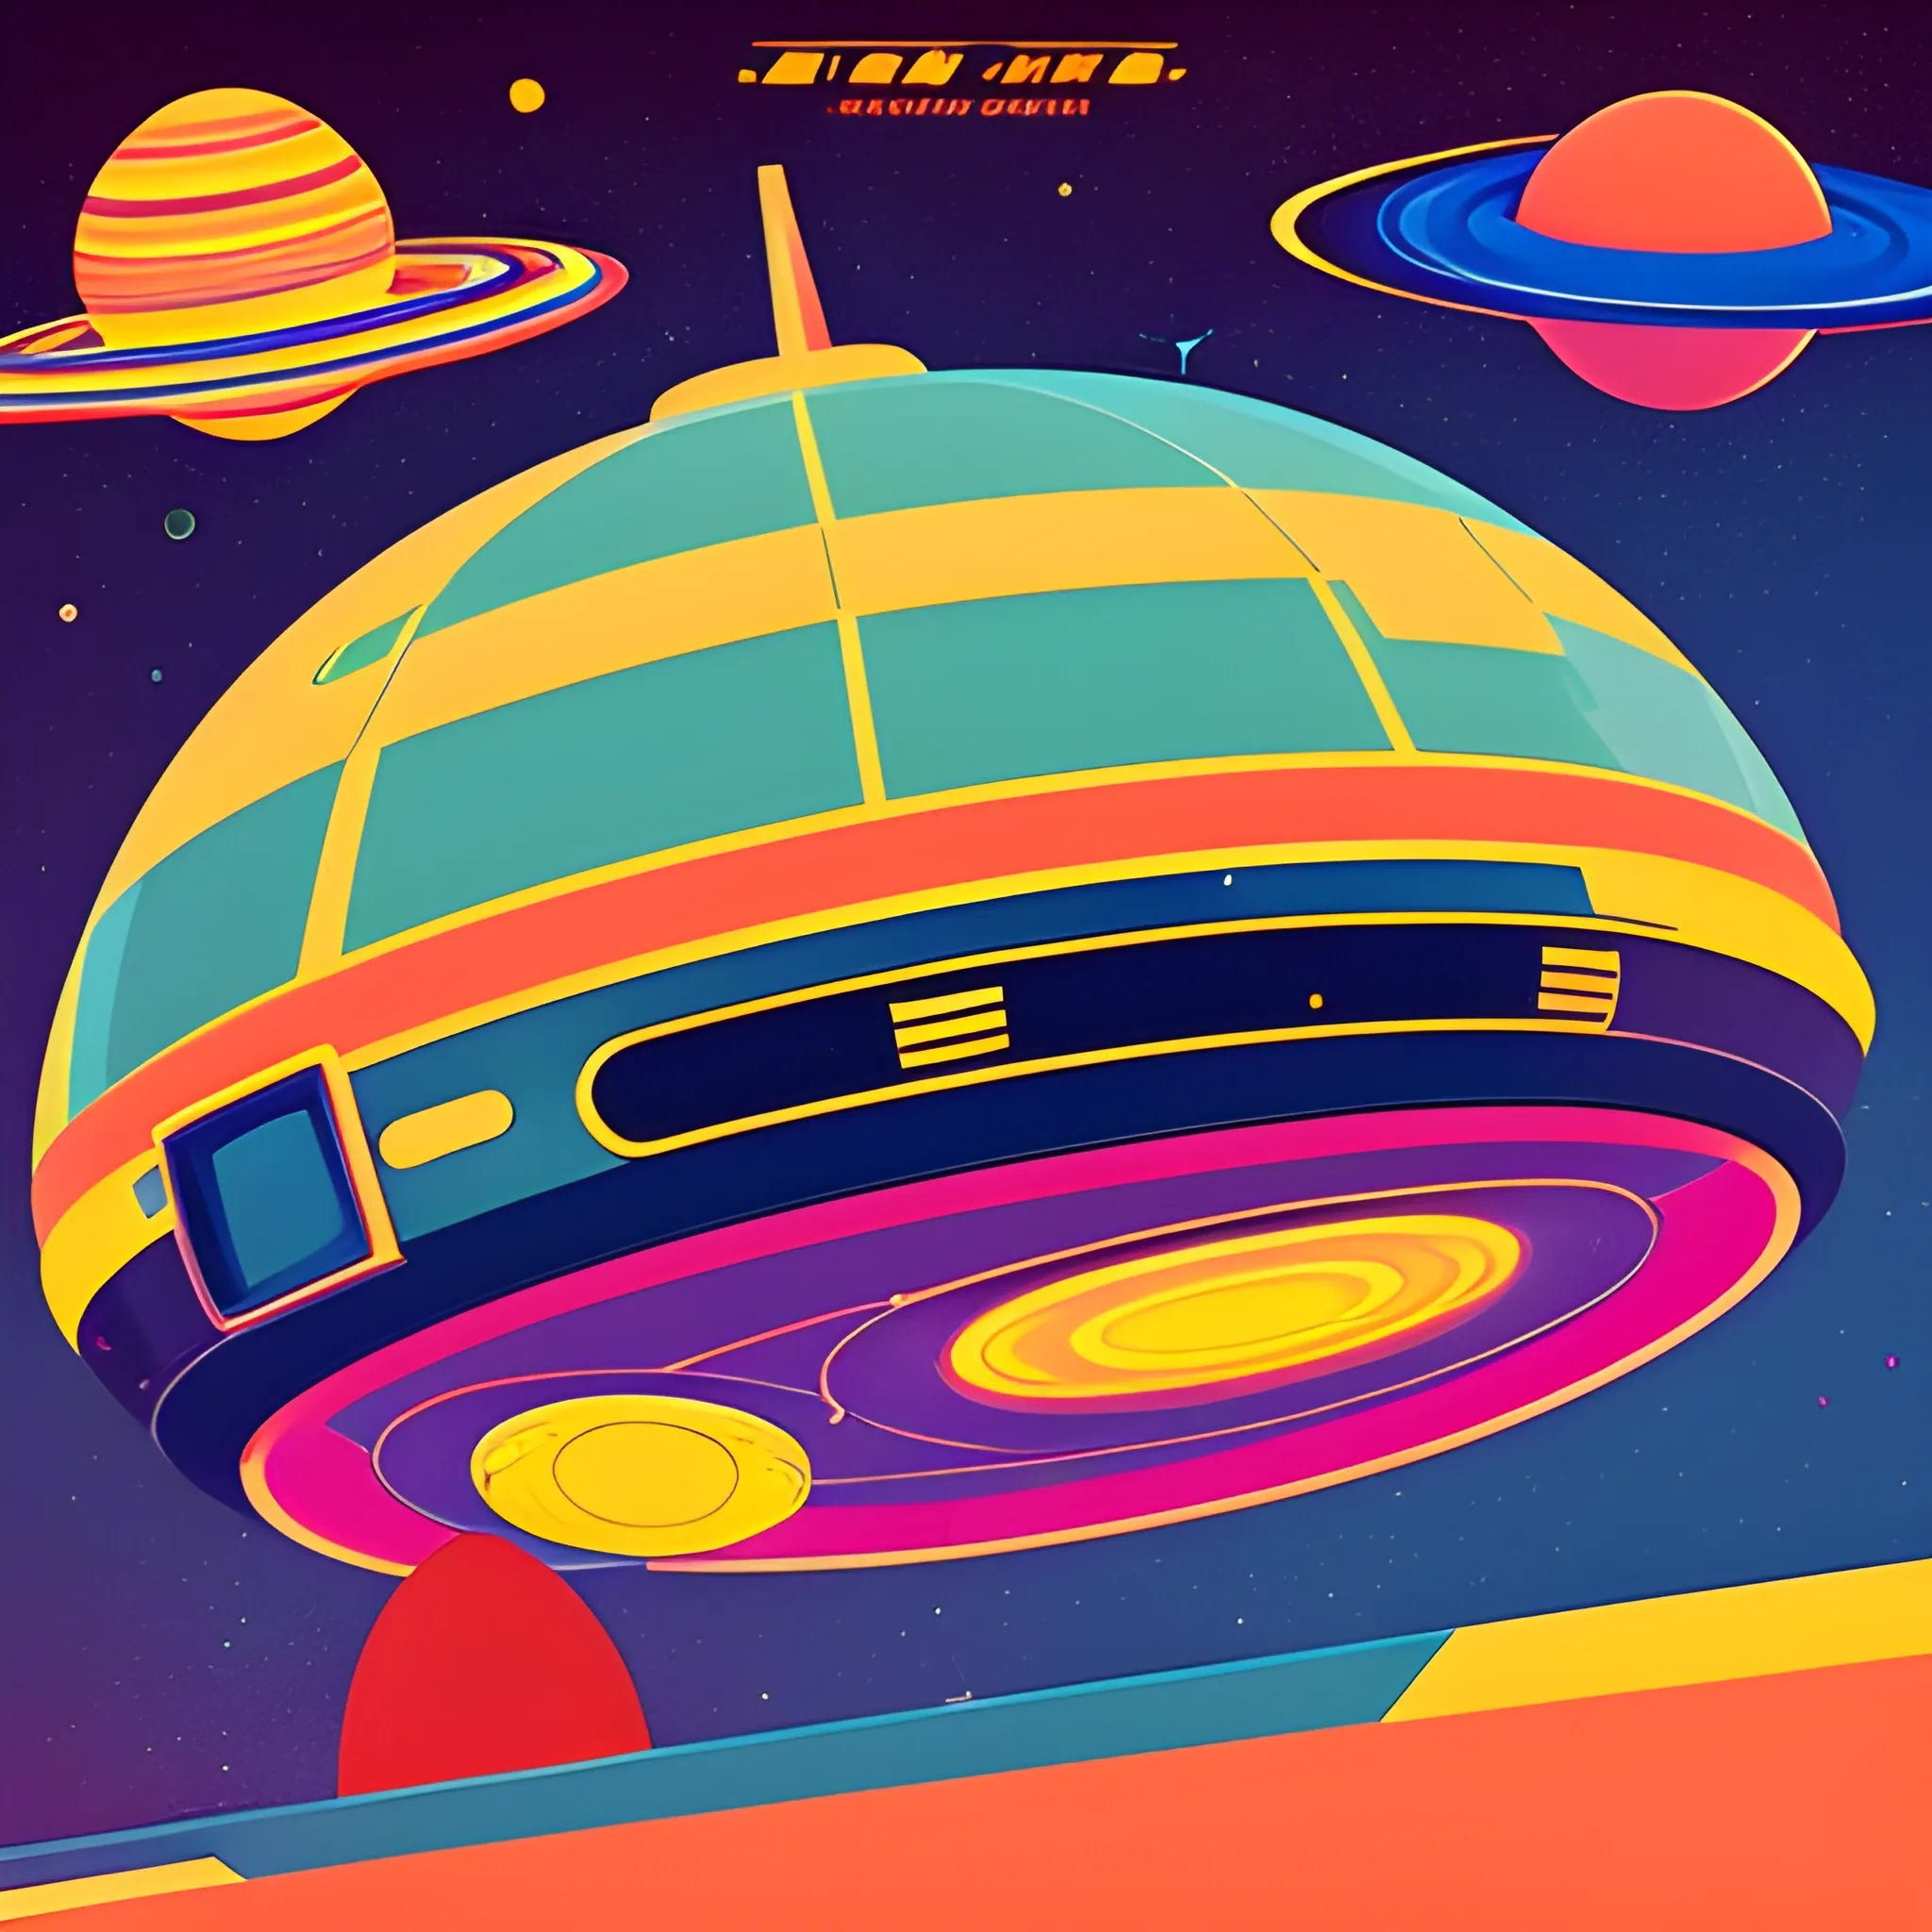 Retro style that evokes space age nostalgia of the 60s and 70s. Uses vibrant colors and graphics inspired by old sci-fi movies., 3D, Cartoon